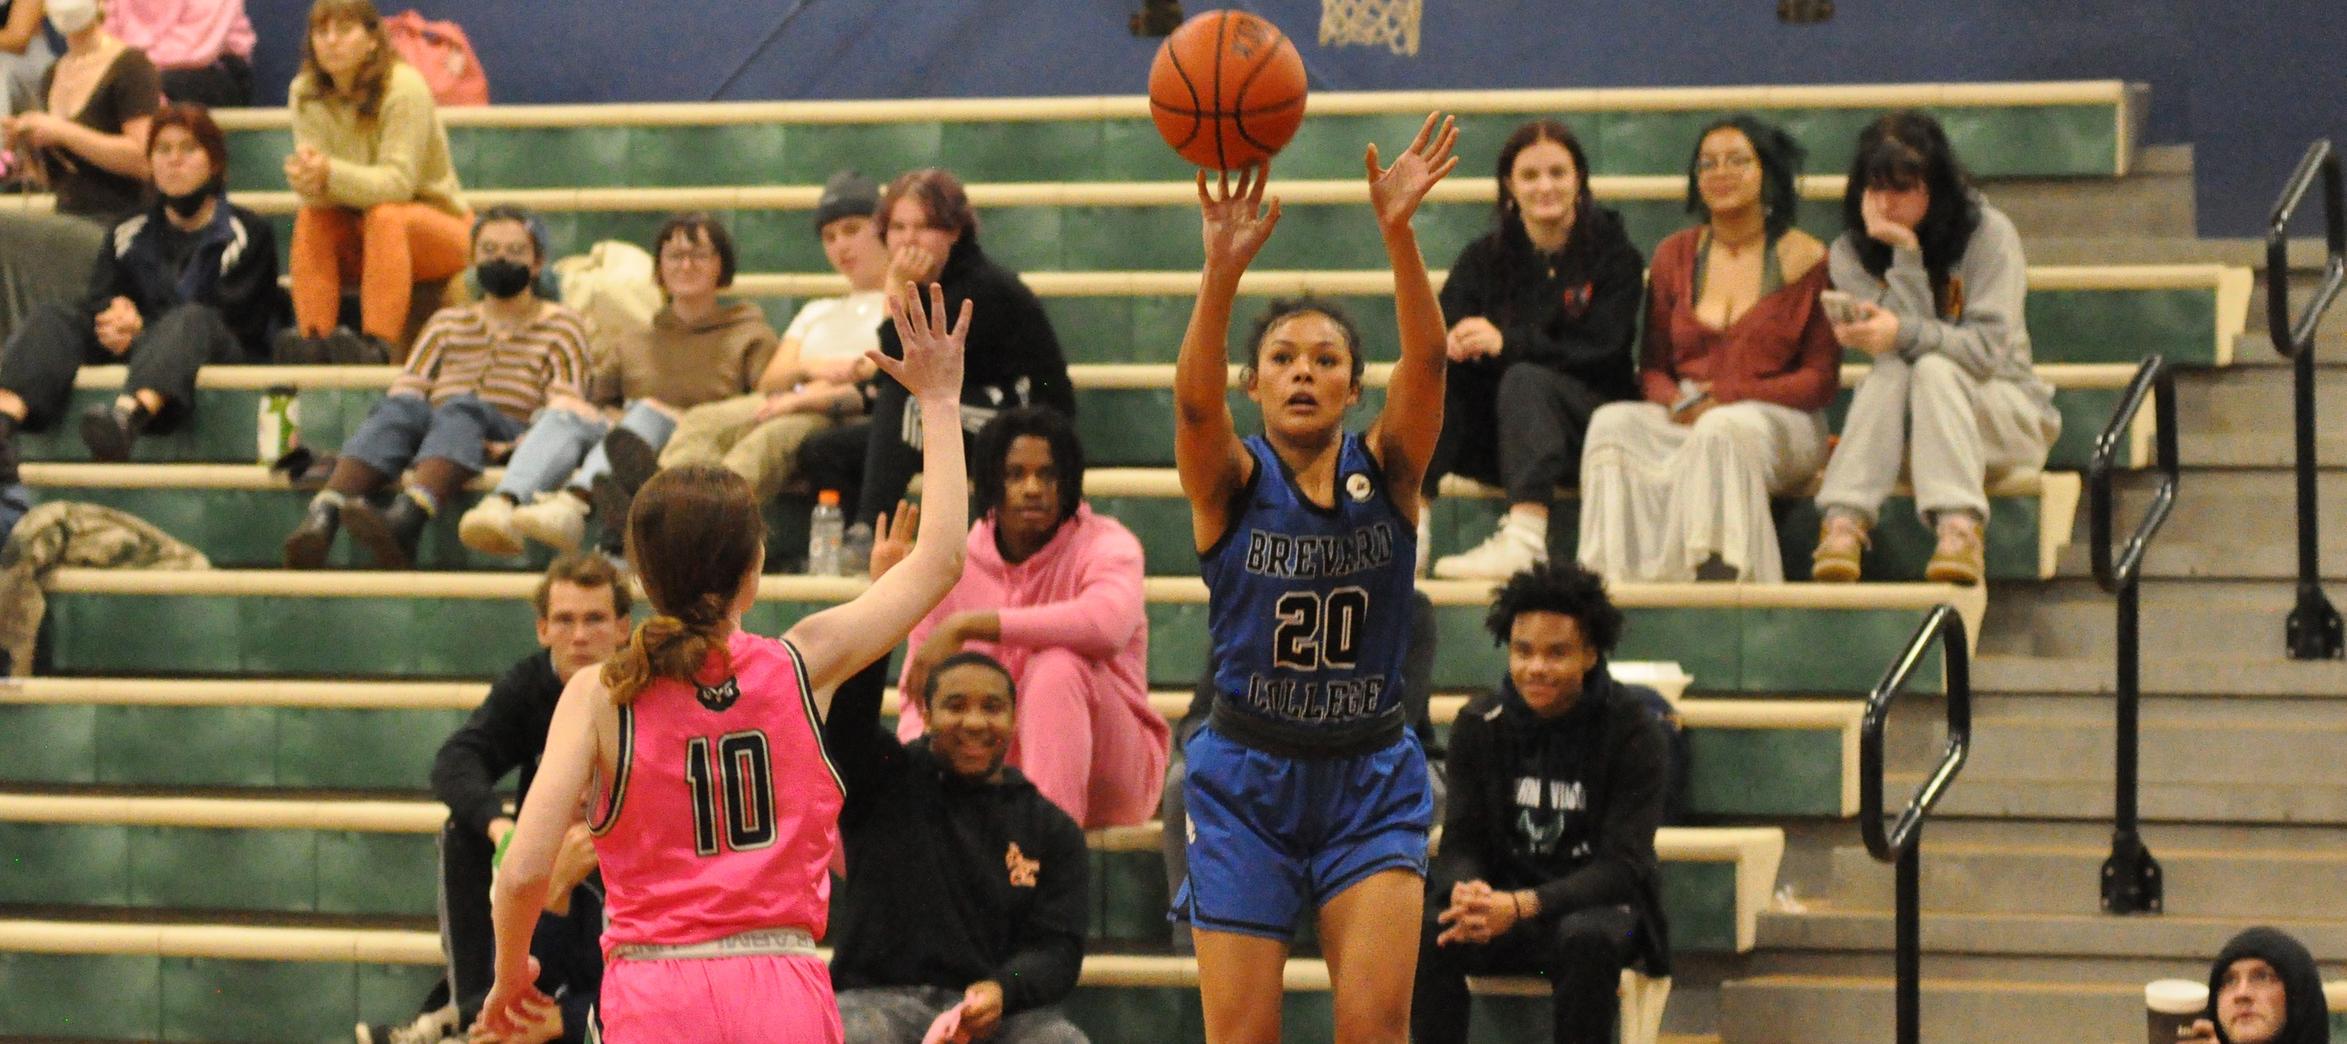 Big First Half, Five Double Figure Scorers Send Brevard to 34-Point Road Win